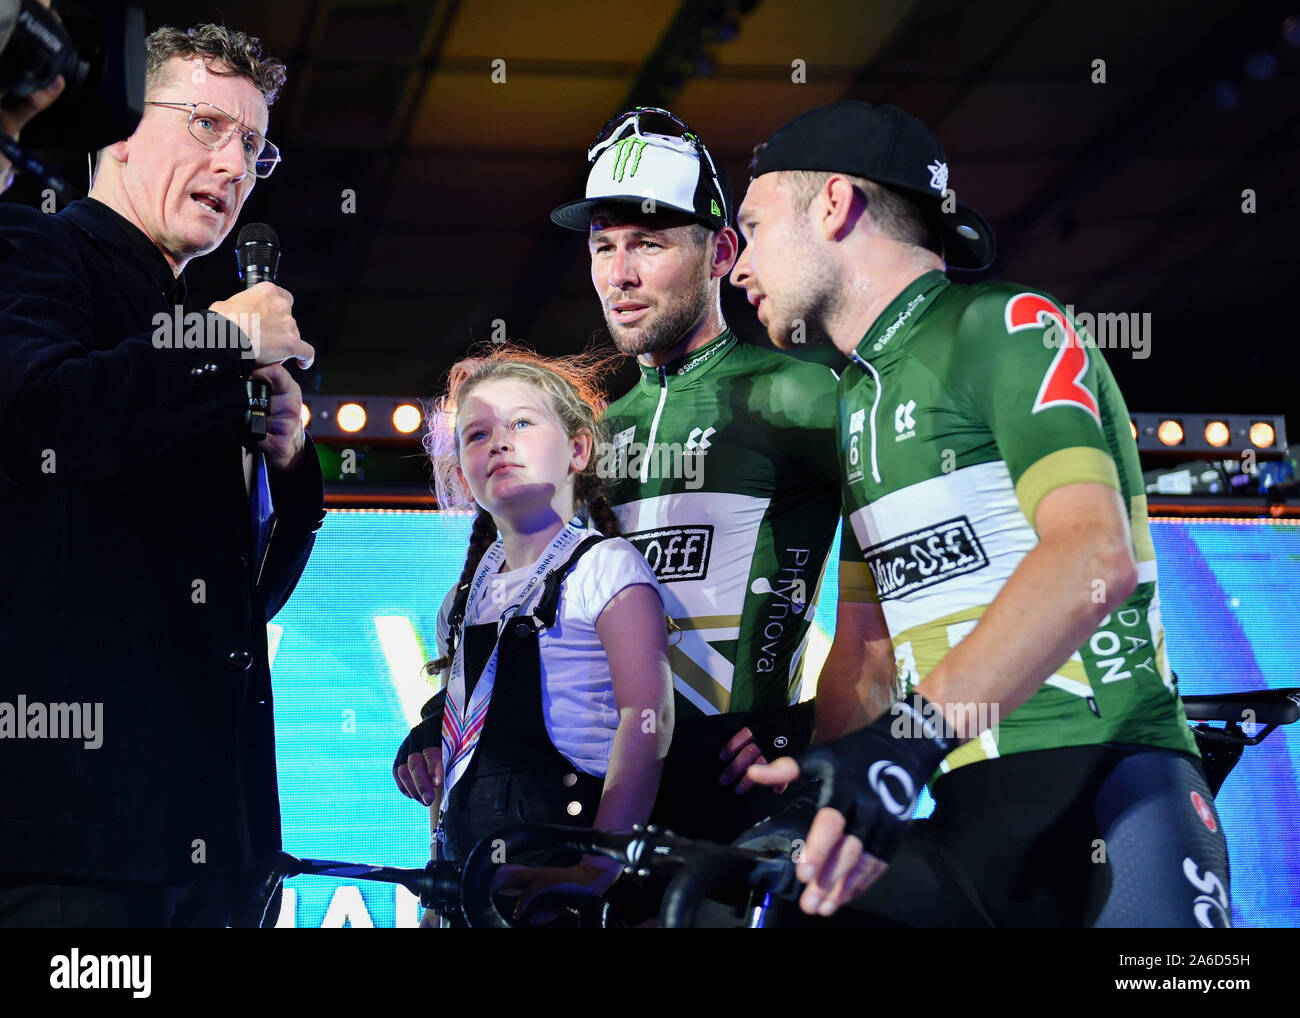 LONDON, UNITED KINGDOM. 25th Oct, 2019. Mark Cavendish and his daughter, and team mate Owain Doull of Great Britain was interviewed after winning of the 20 minutes Madison Chase during Day 4 of Six Day London 2019 at Lee Valley VeloPark on Friday, October 25, 2019 in LONDON, UNITED KINGDOM. Credit: Taka G Wu/Alamy Live News Stock Photo